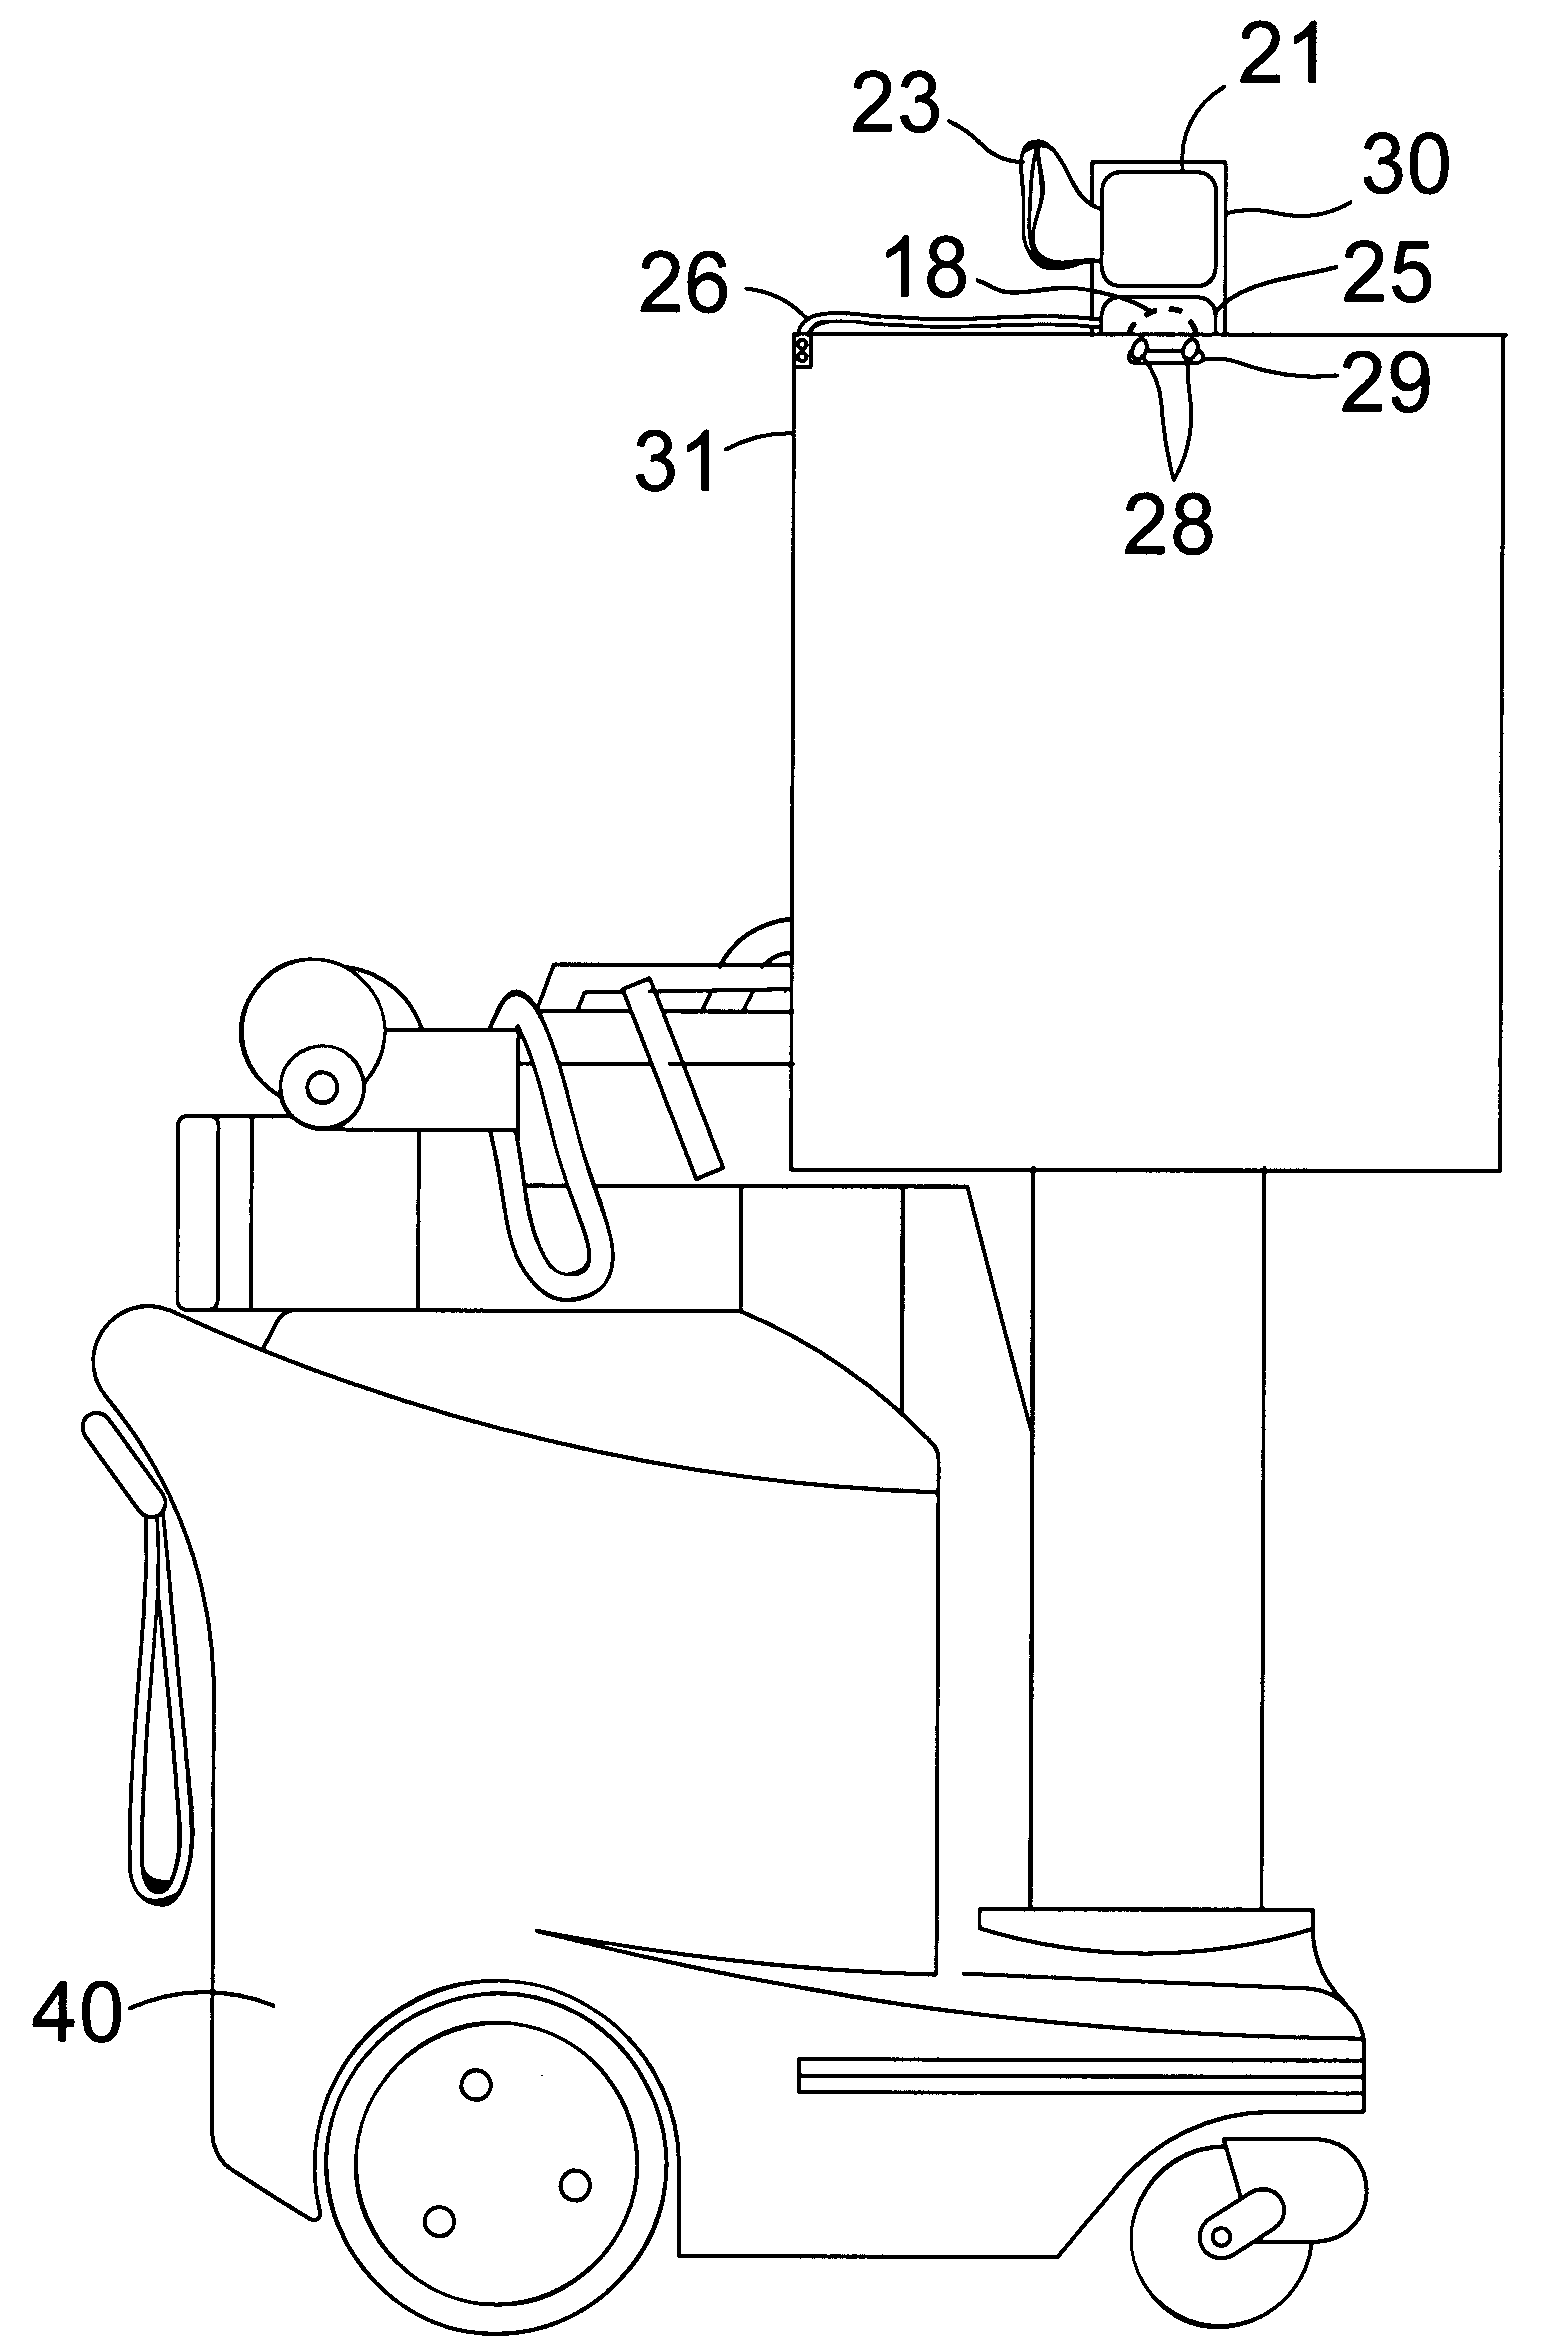 Radiation shield securing and covering system